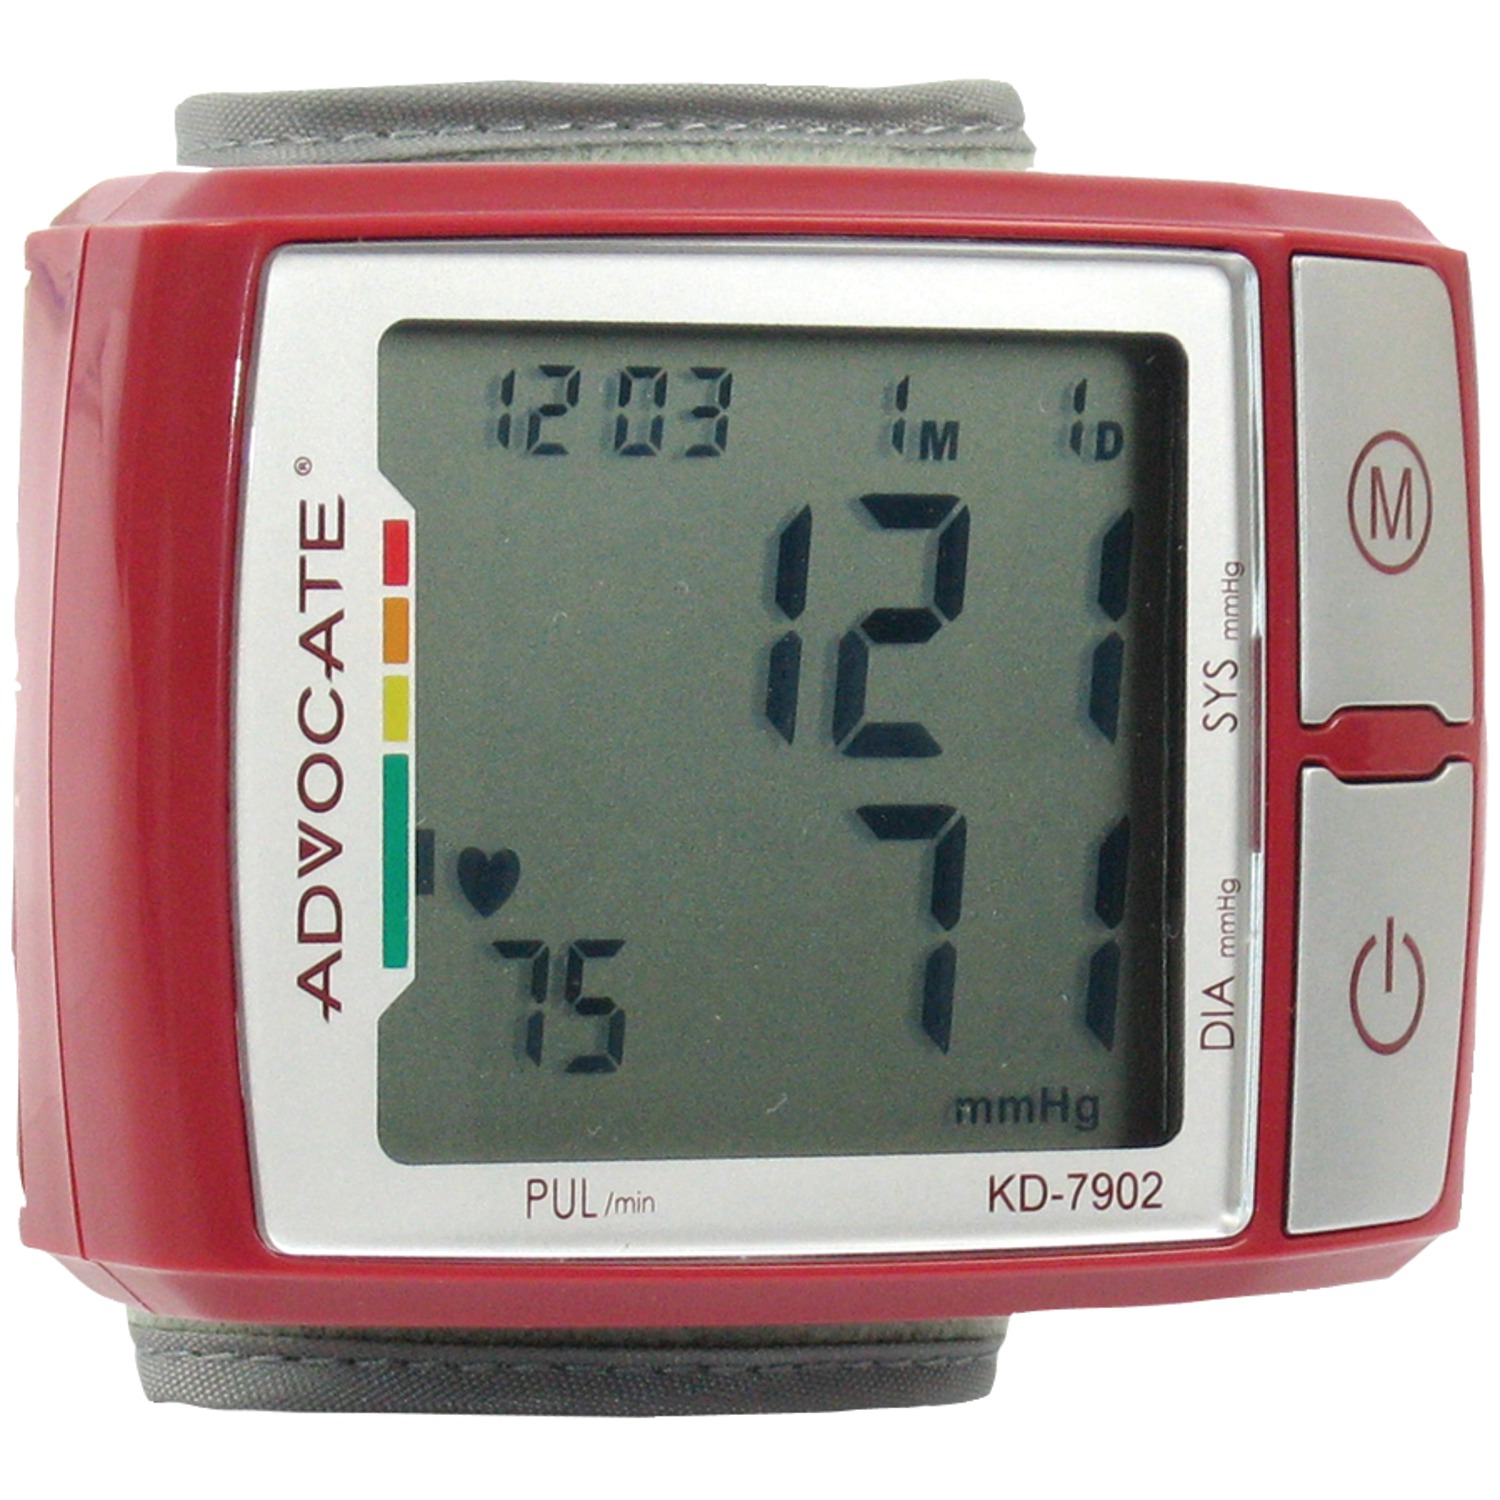 ADVOCATE KD-7902 Wrist Blood Pressure Monitor with Color Indicator - image 1 of 4